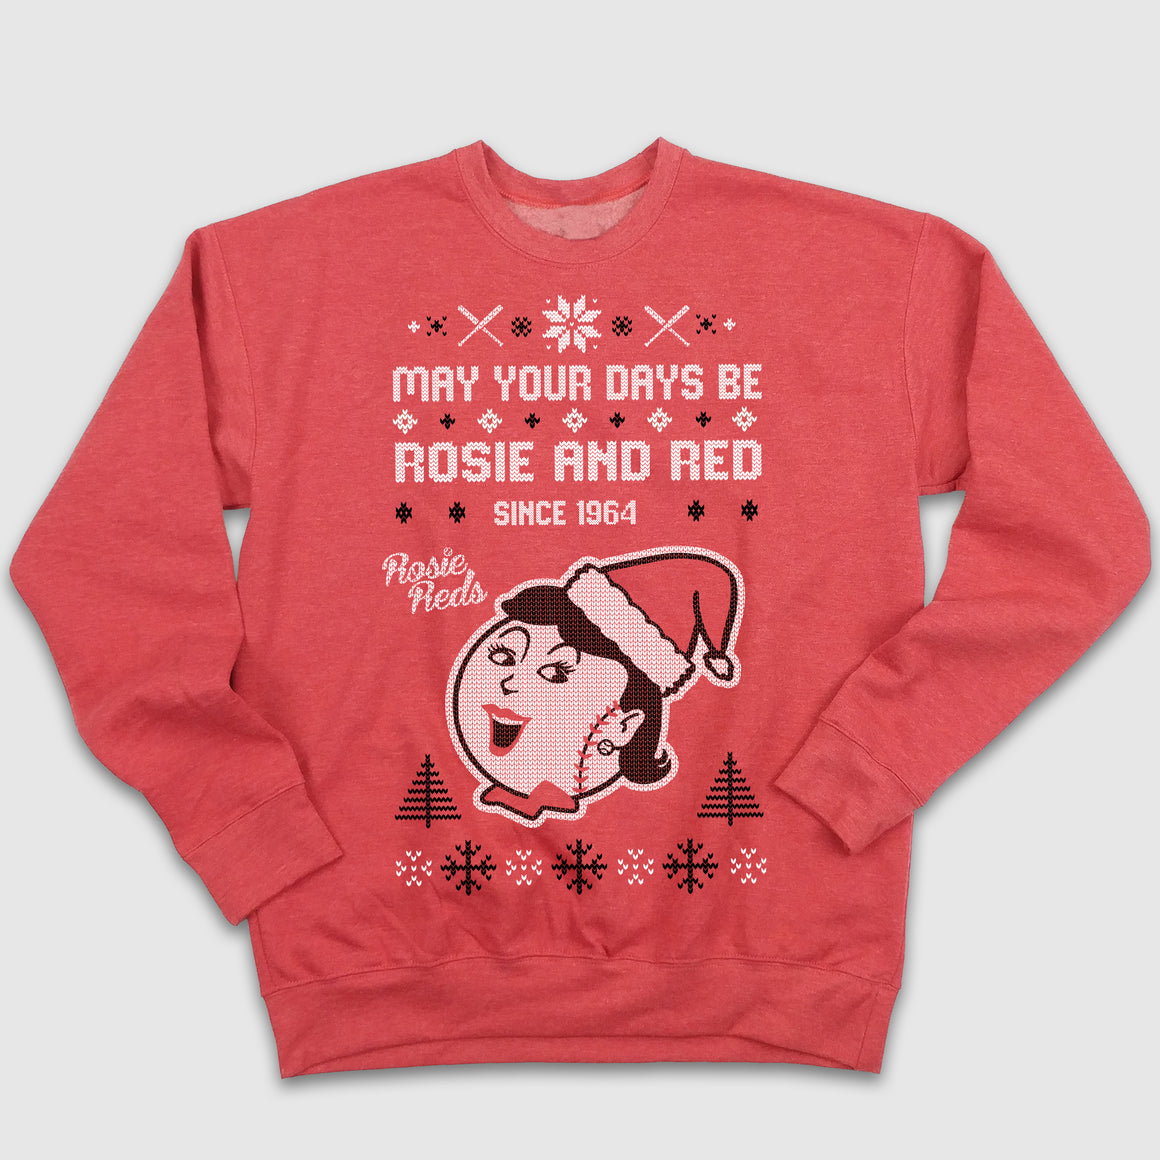 May Your Days Be Rosie and Red Ugly Christmas Sweatshirt - Cincy Shirts